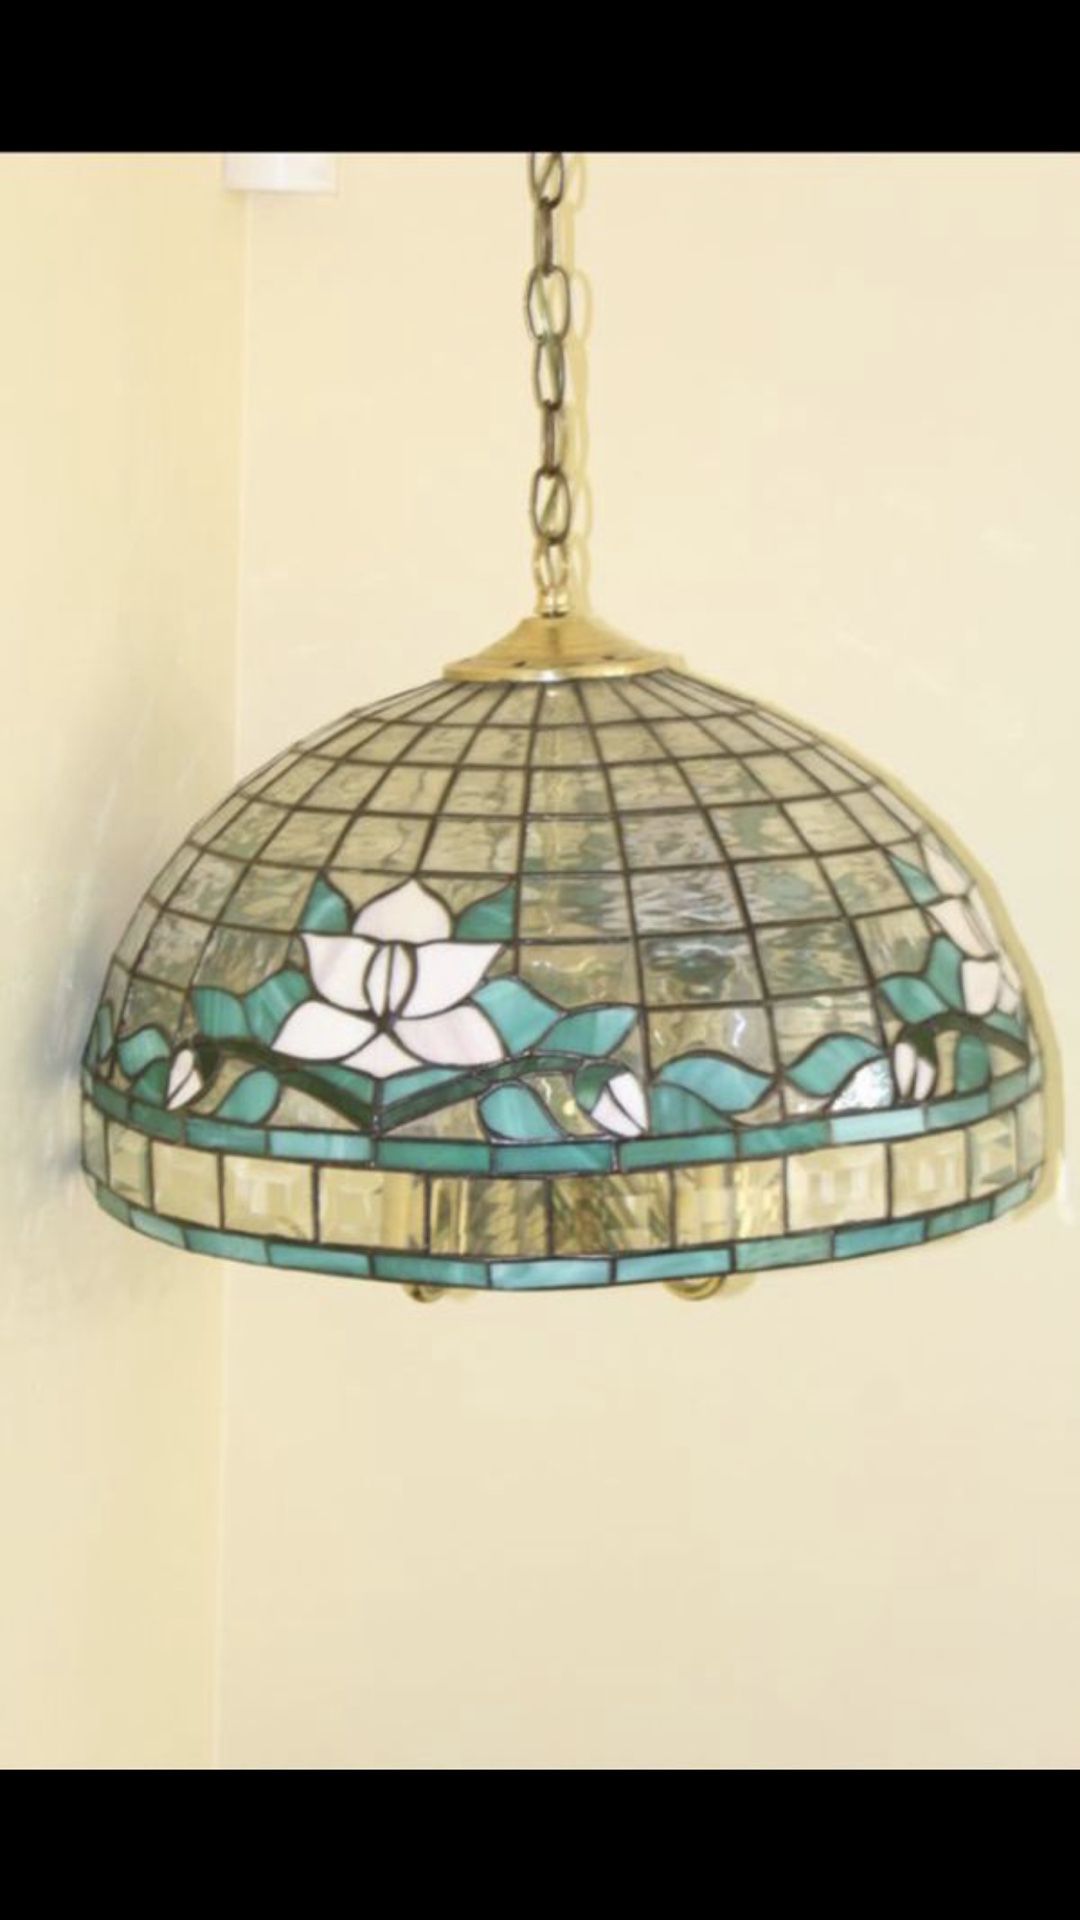 TIFFANY STYLE HANGING LAMP, CHANDELIER COMES FROM A CLEAN AND SMOKE FREE HOME LAMPARA DE COLGAR ESTILO TIFFANY